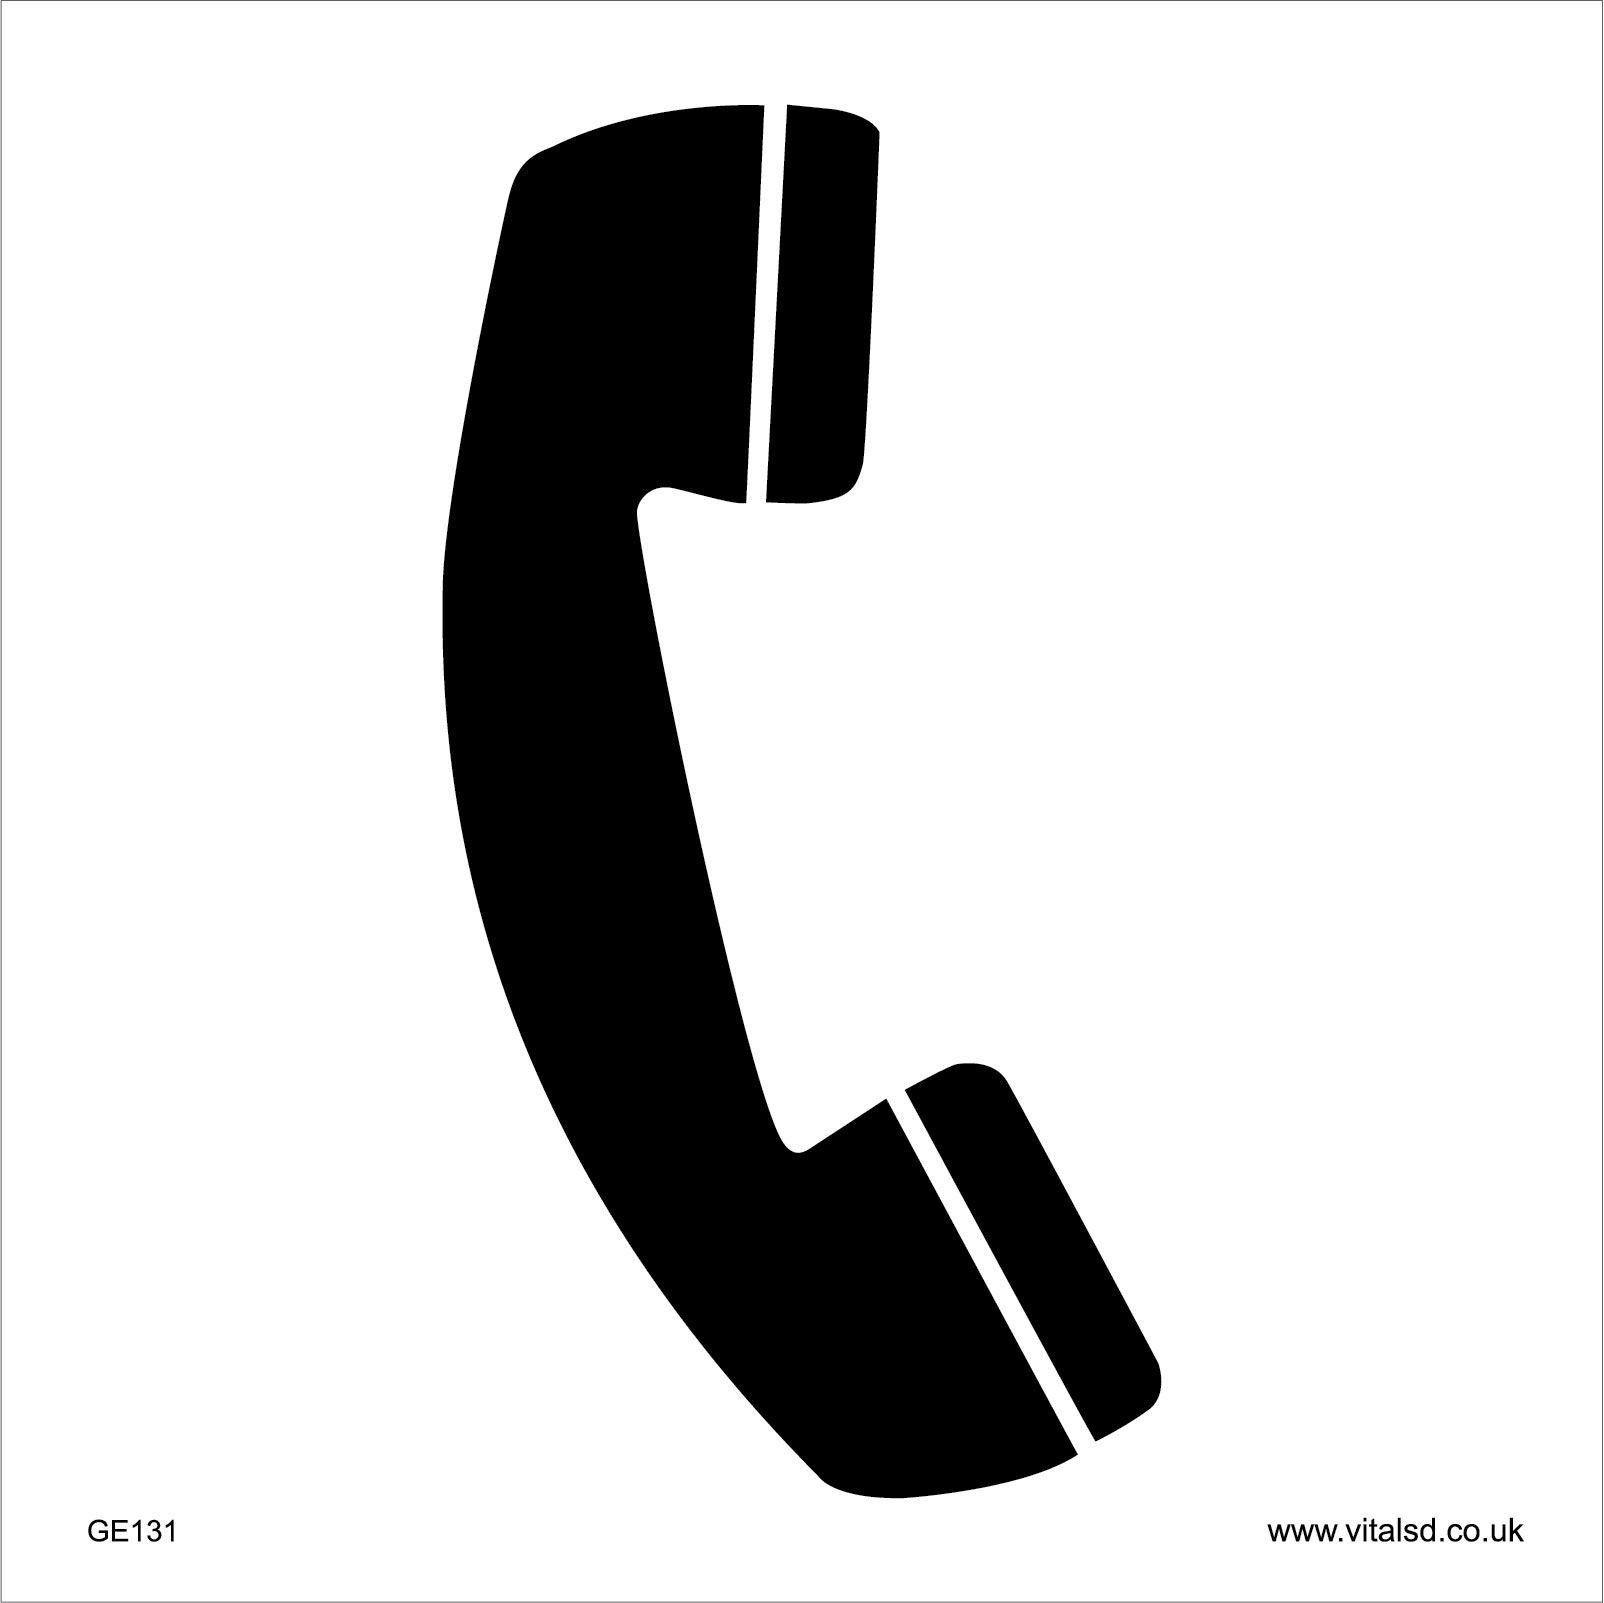 Black and White Telephone Logo - GE131-CL-0150-0150 Telephone Sign 150 X 150mm - 6 X 6